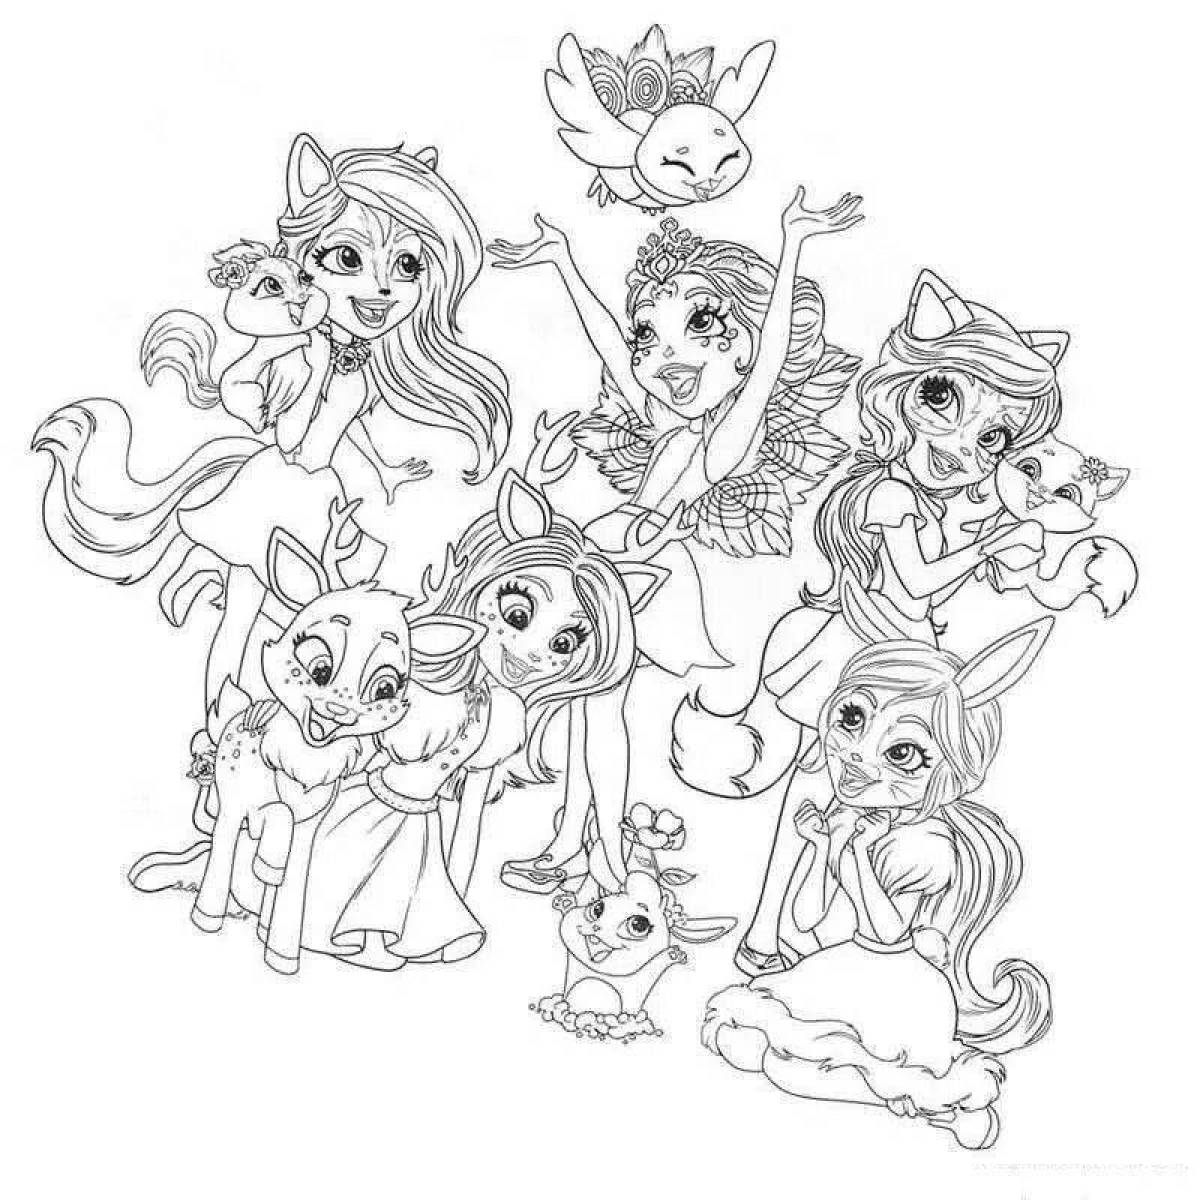 Inchanchymus bright coloring page